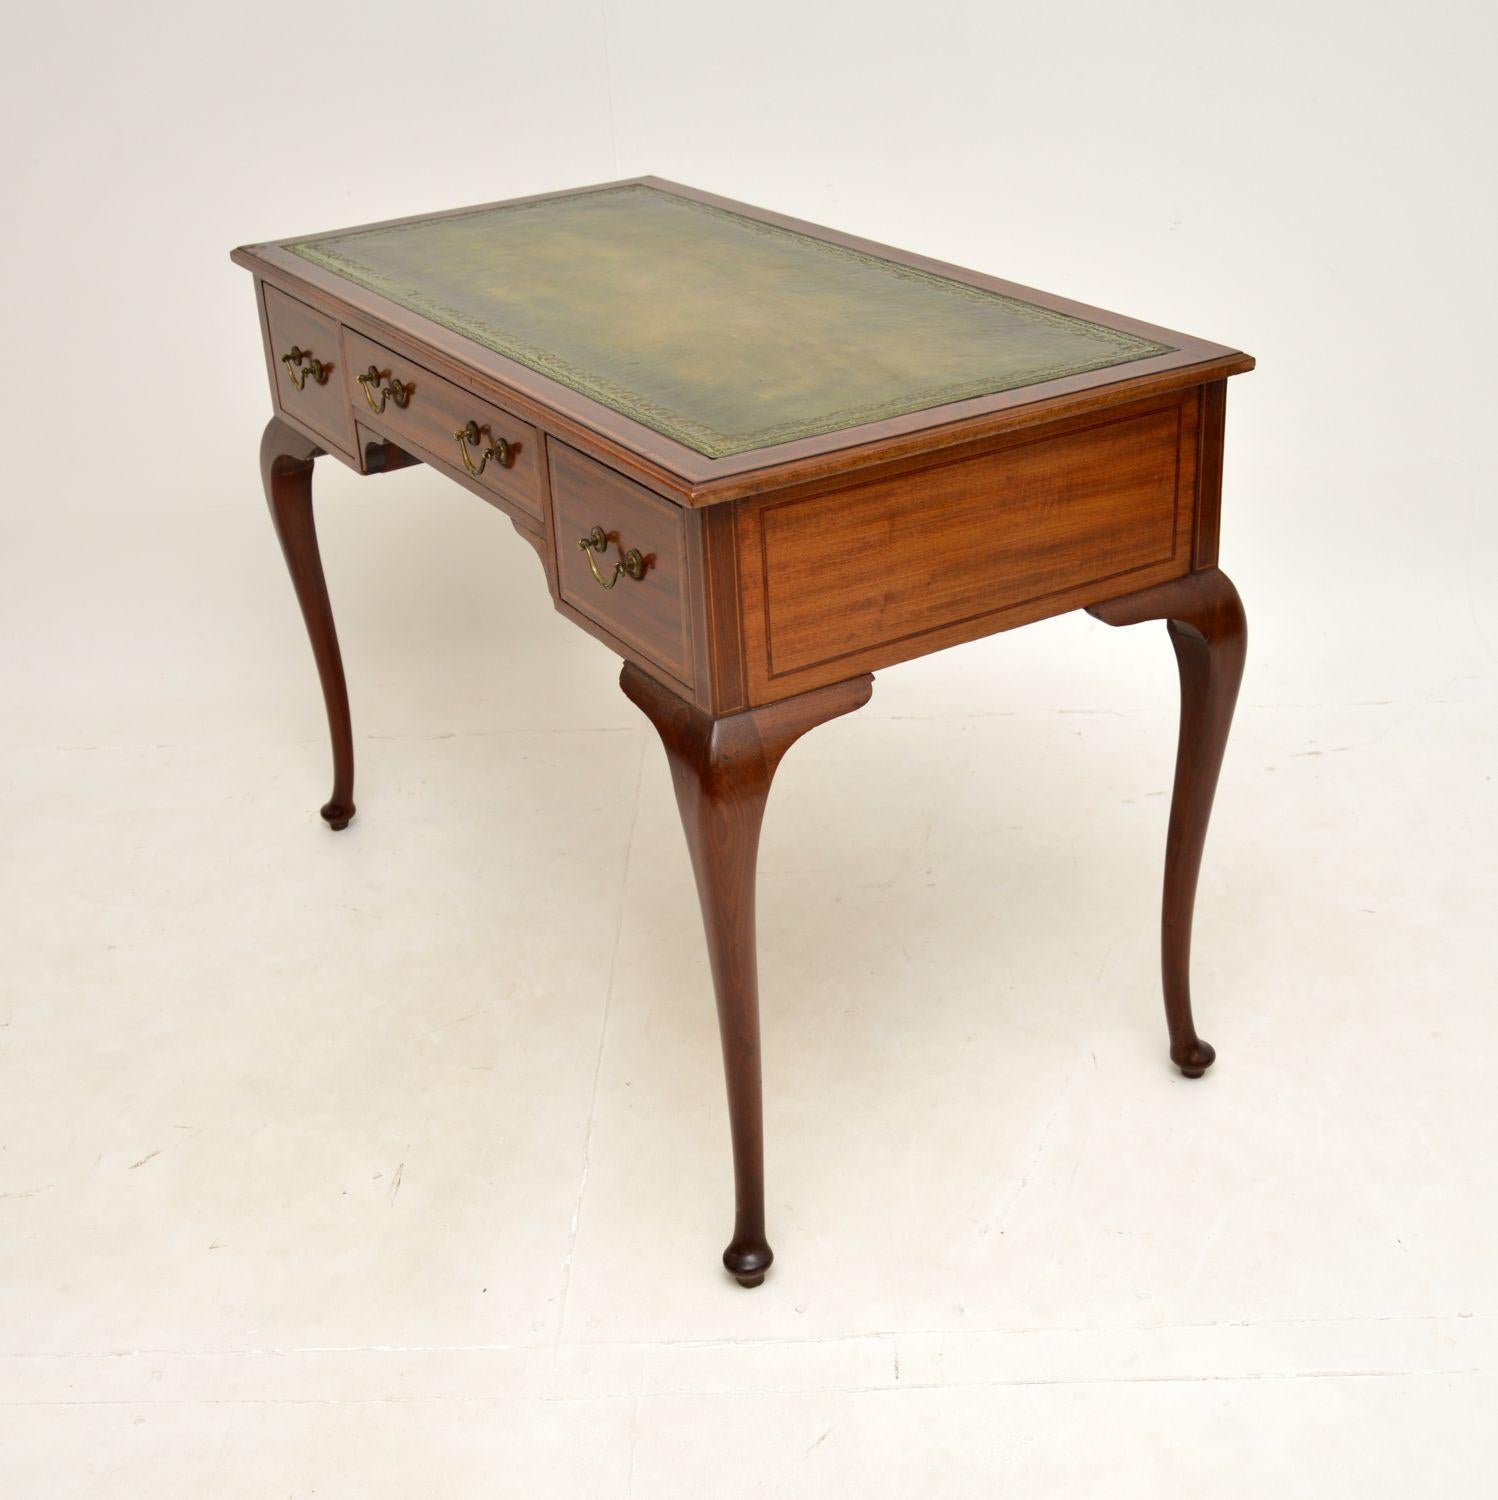 British Antique Edwardian Inlaid Desk by Maple & Co For Sale